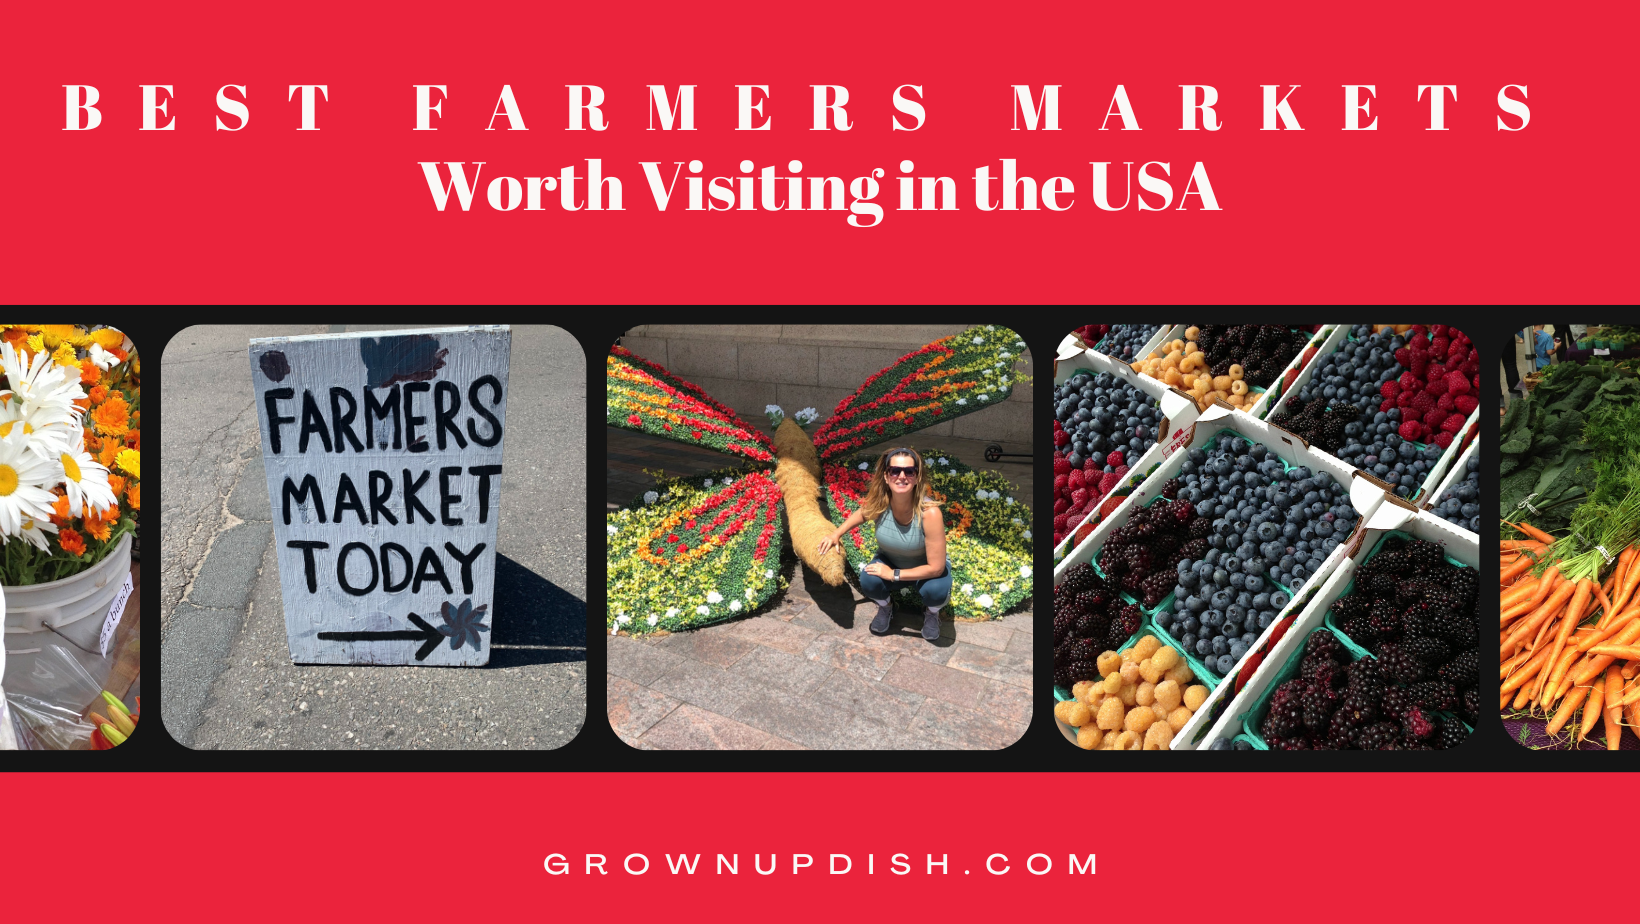 Best Farmers Markets Worth Visiting in the USA